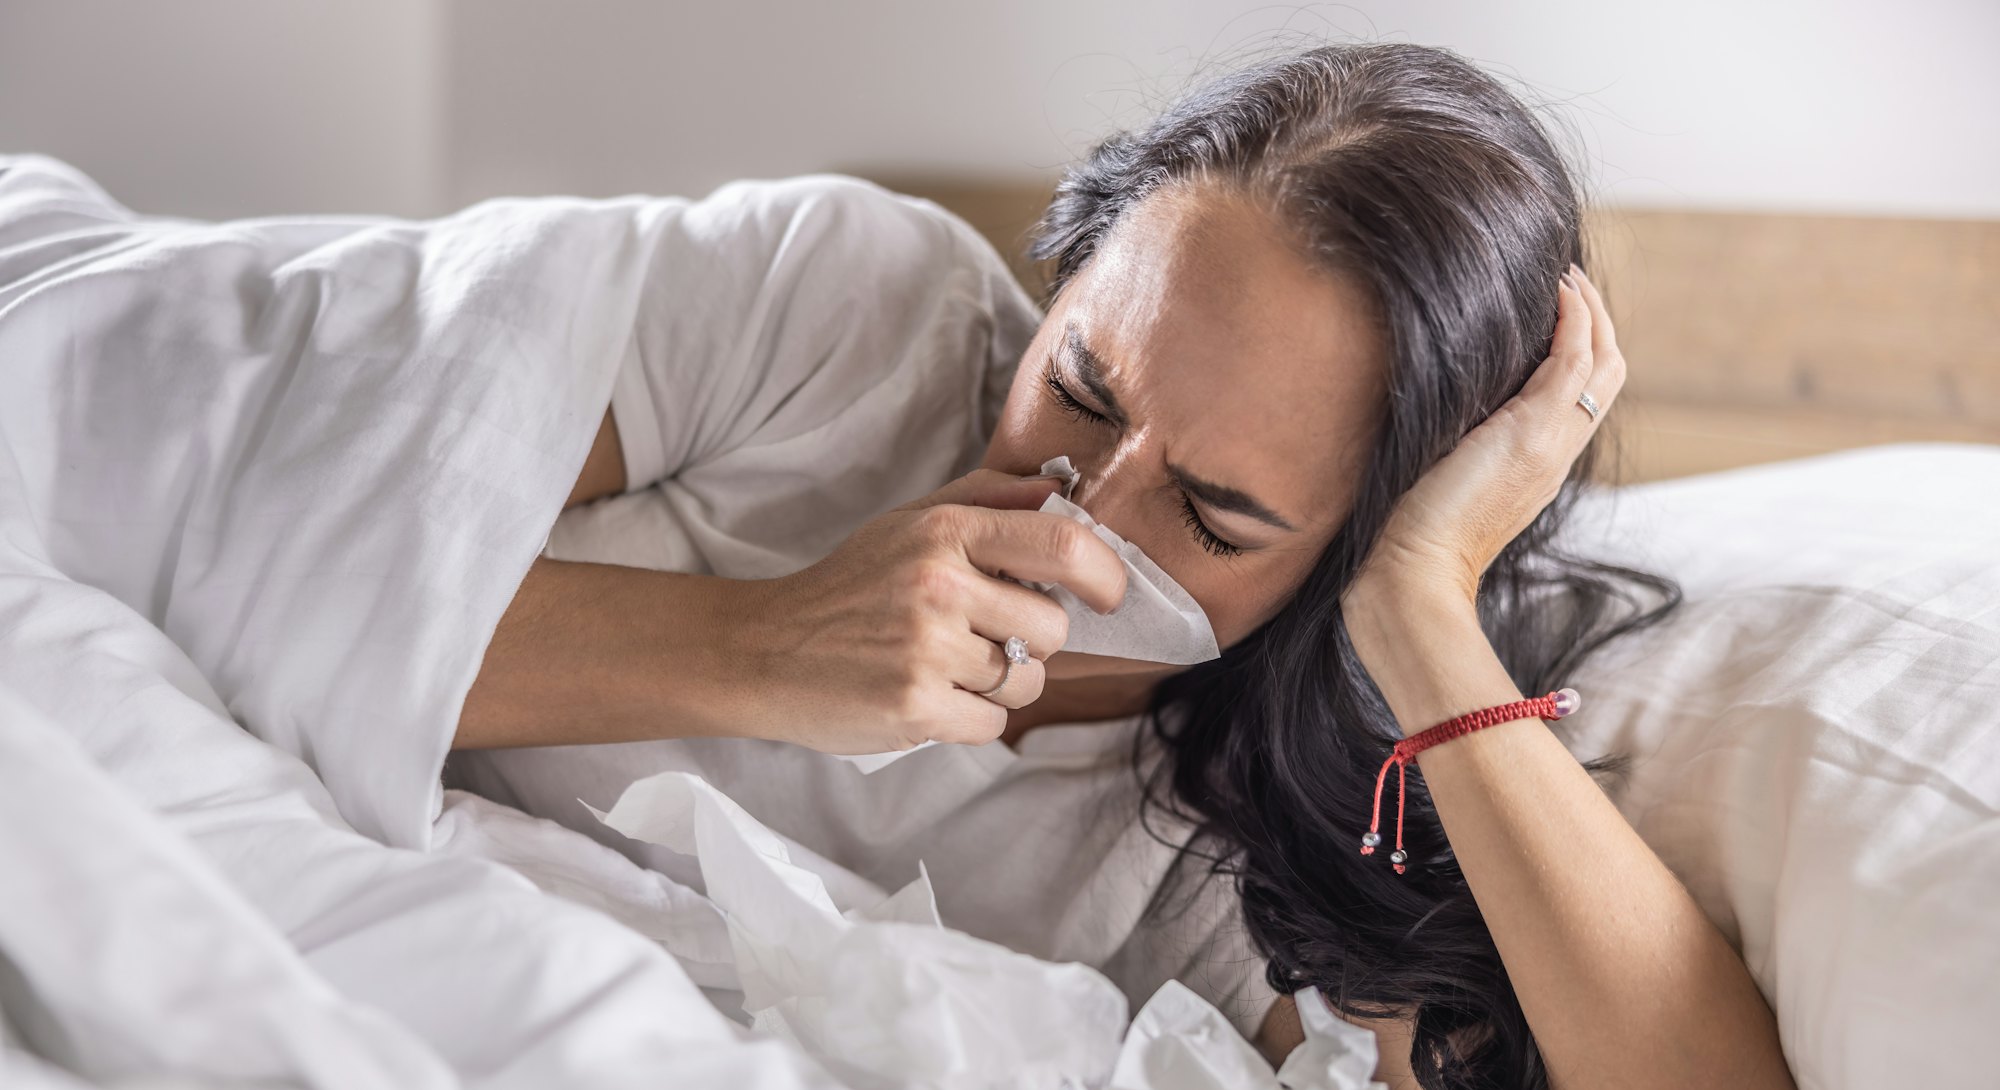 A sick woman sneezes into a napkin, lies in bed, has the flu or a cold.